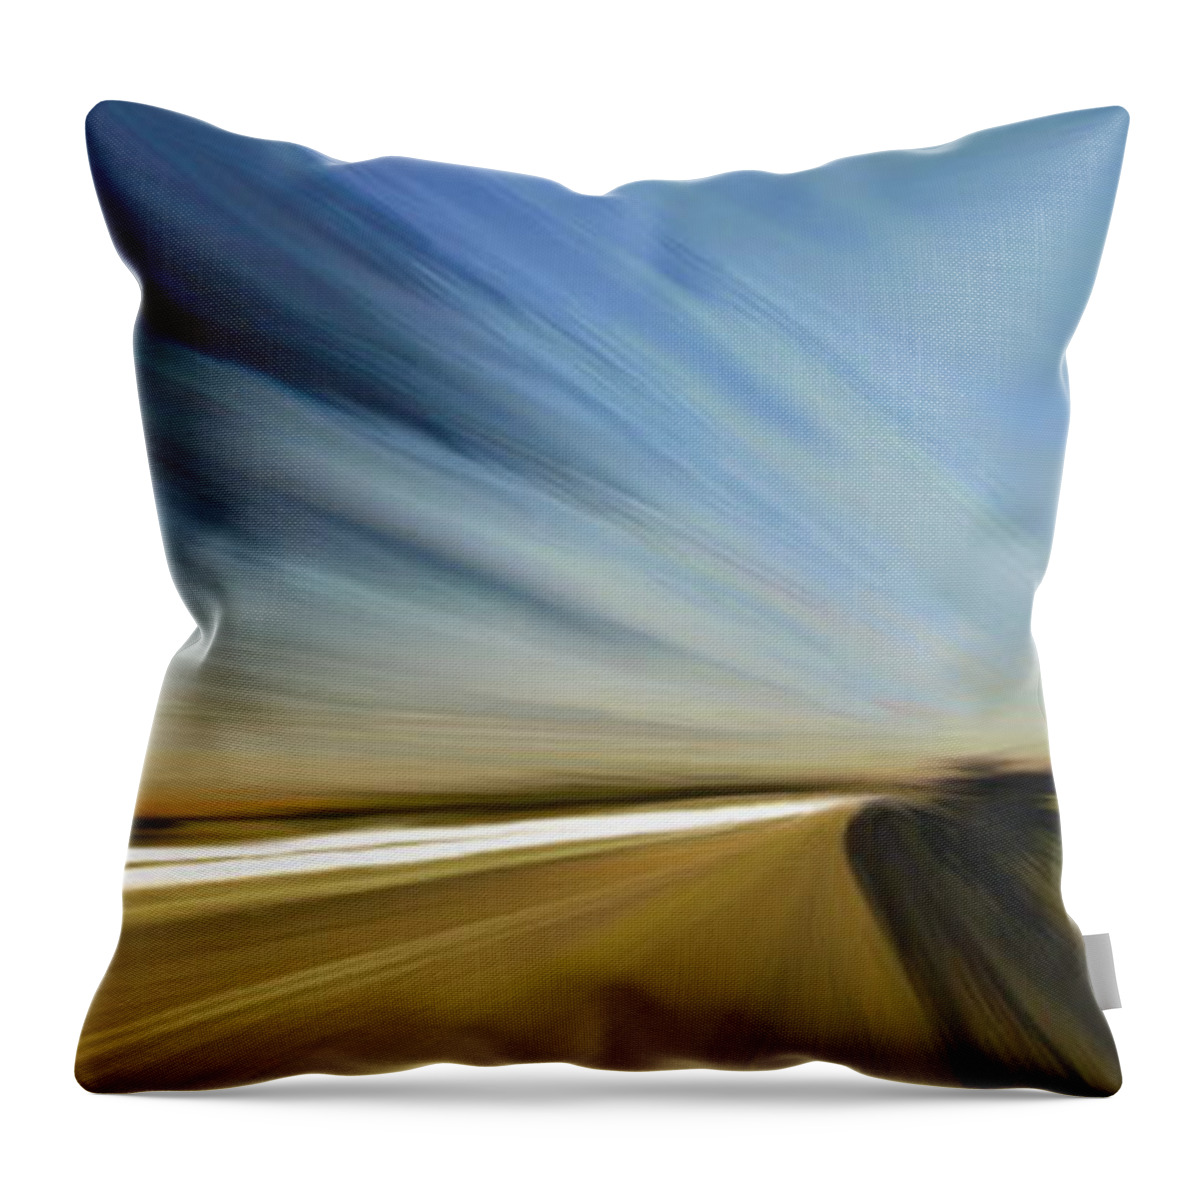 High Speed Throw Pillow featuring the painting High Speed 2 by Rabi Khan